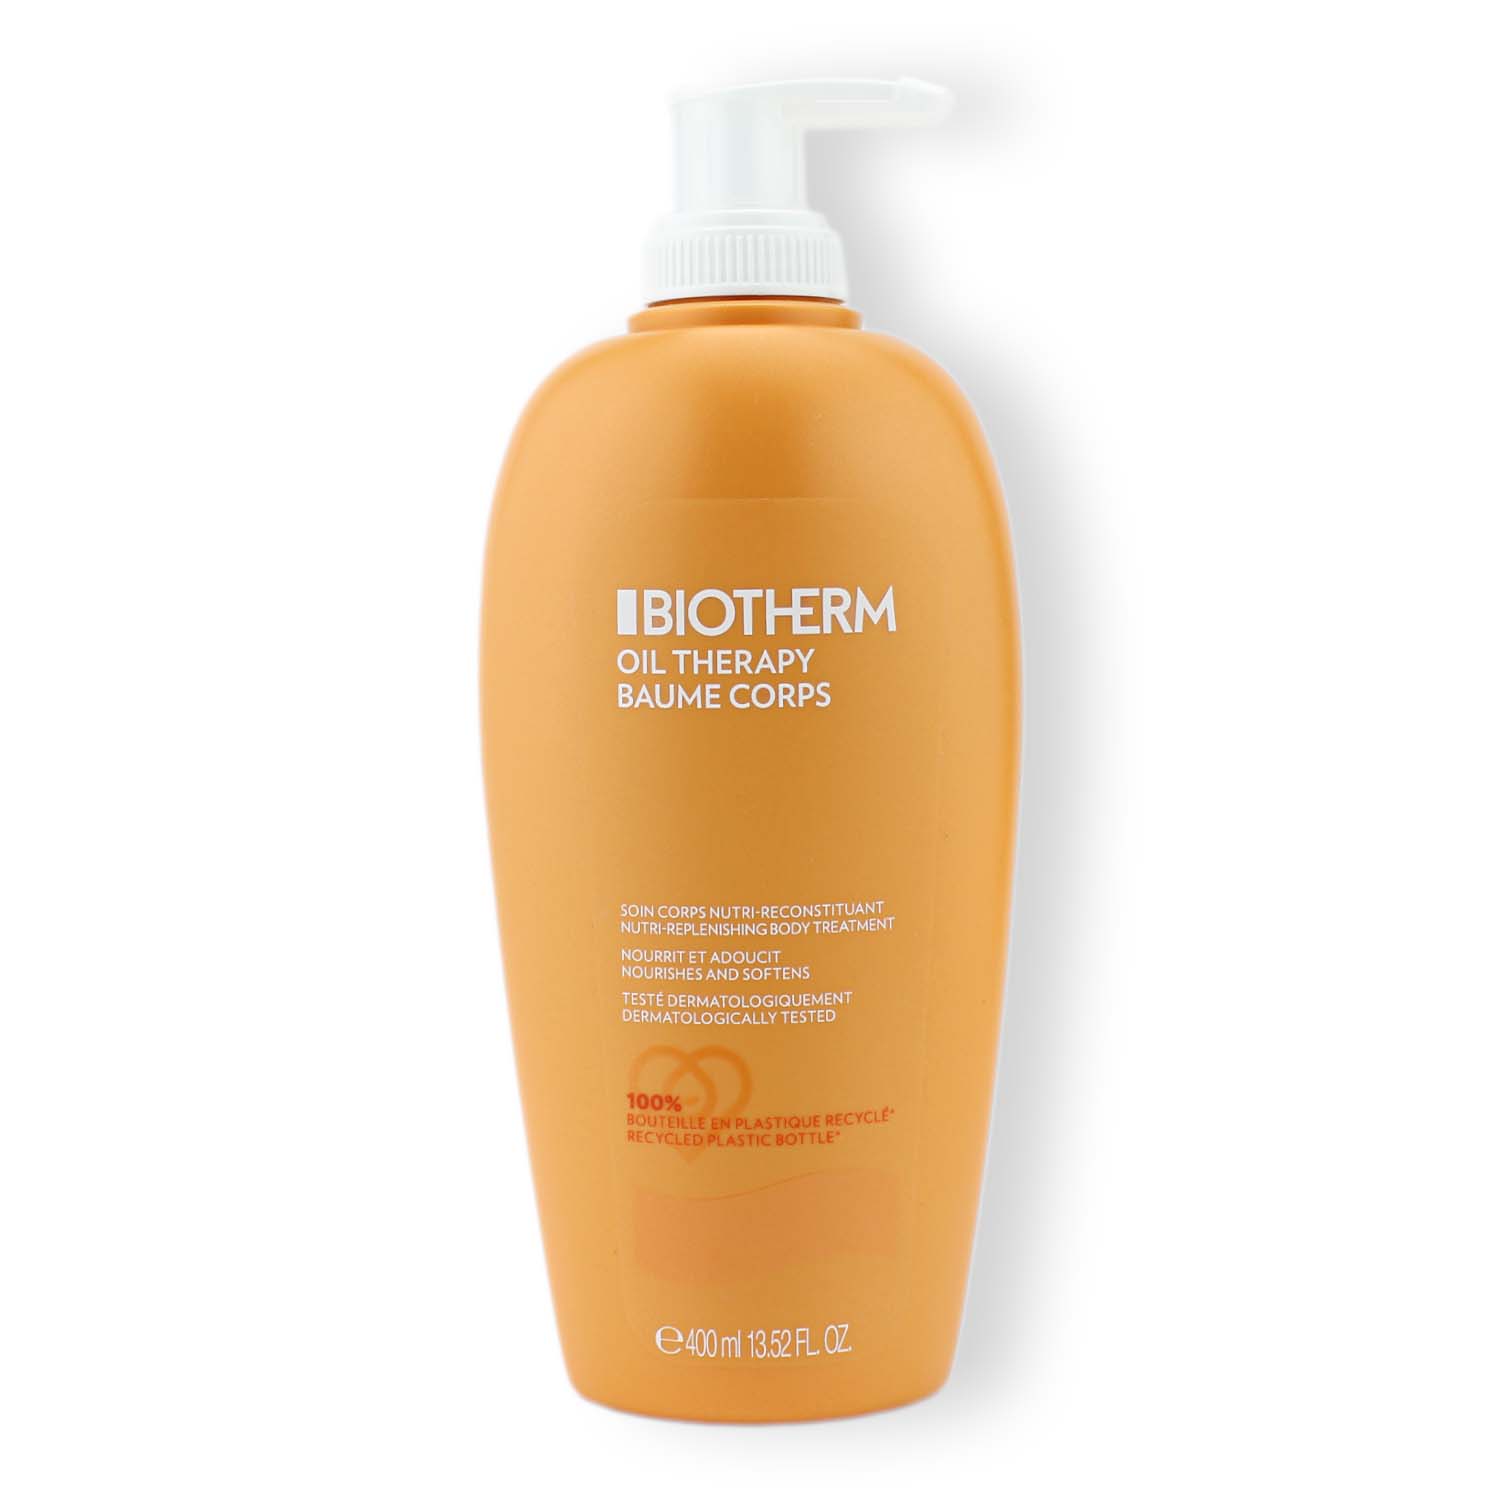 Biotherm Oil Therapy Baume Corps reichhaltige Körpermilch 400ml